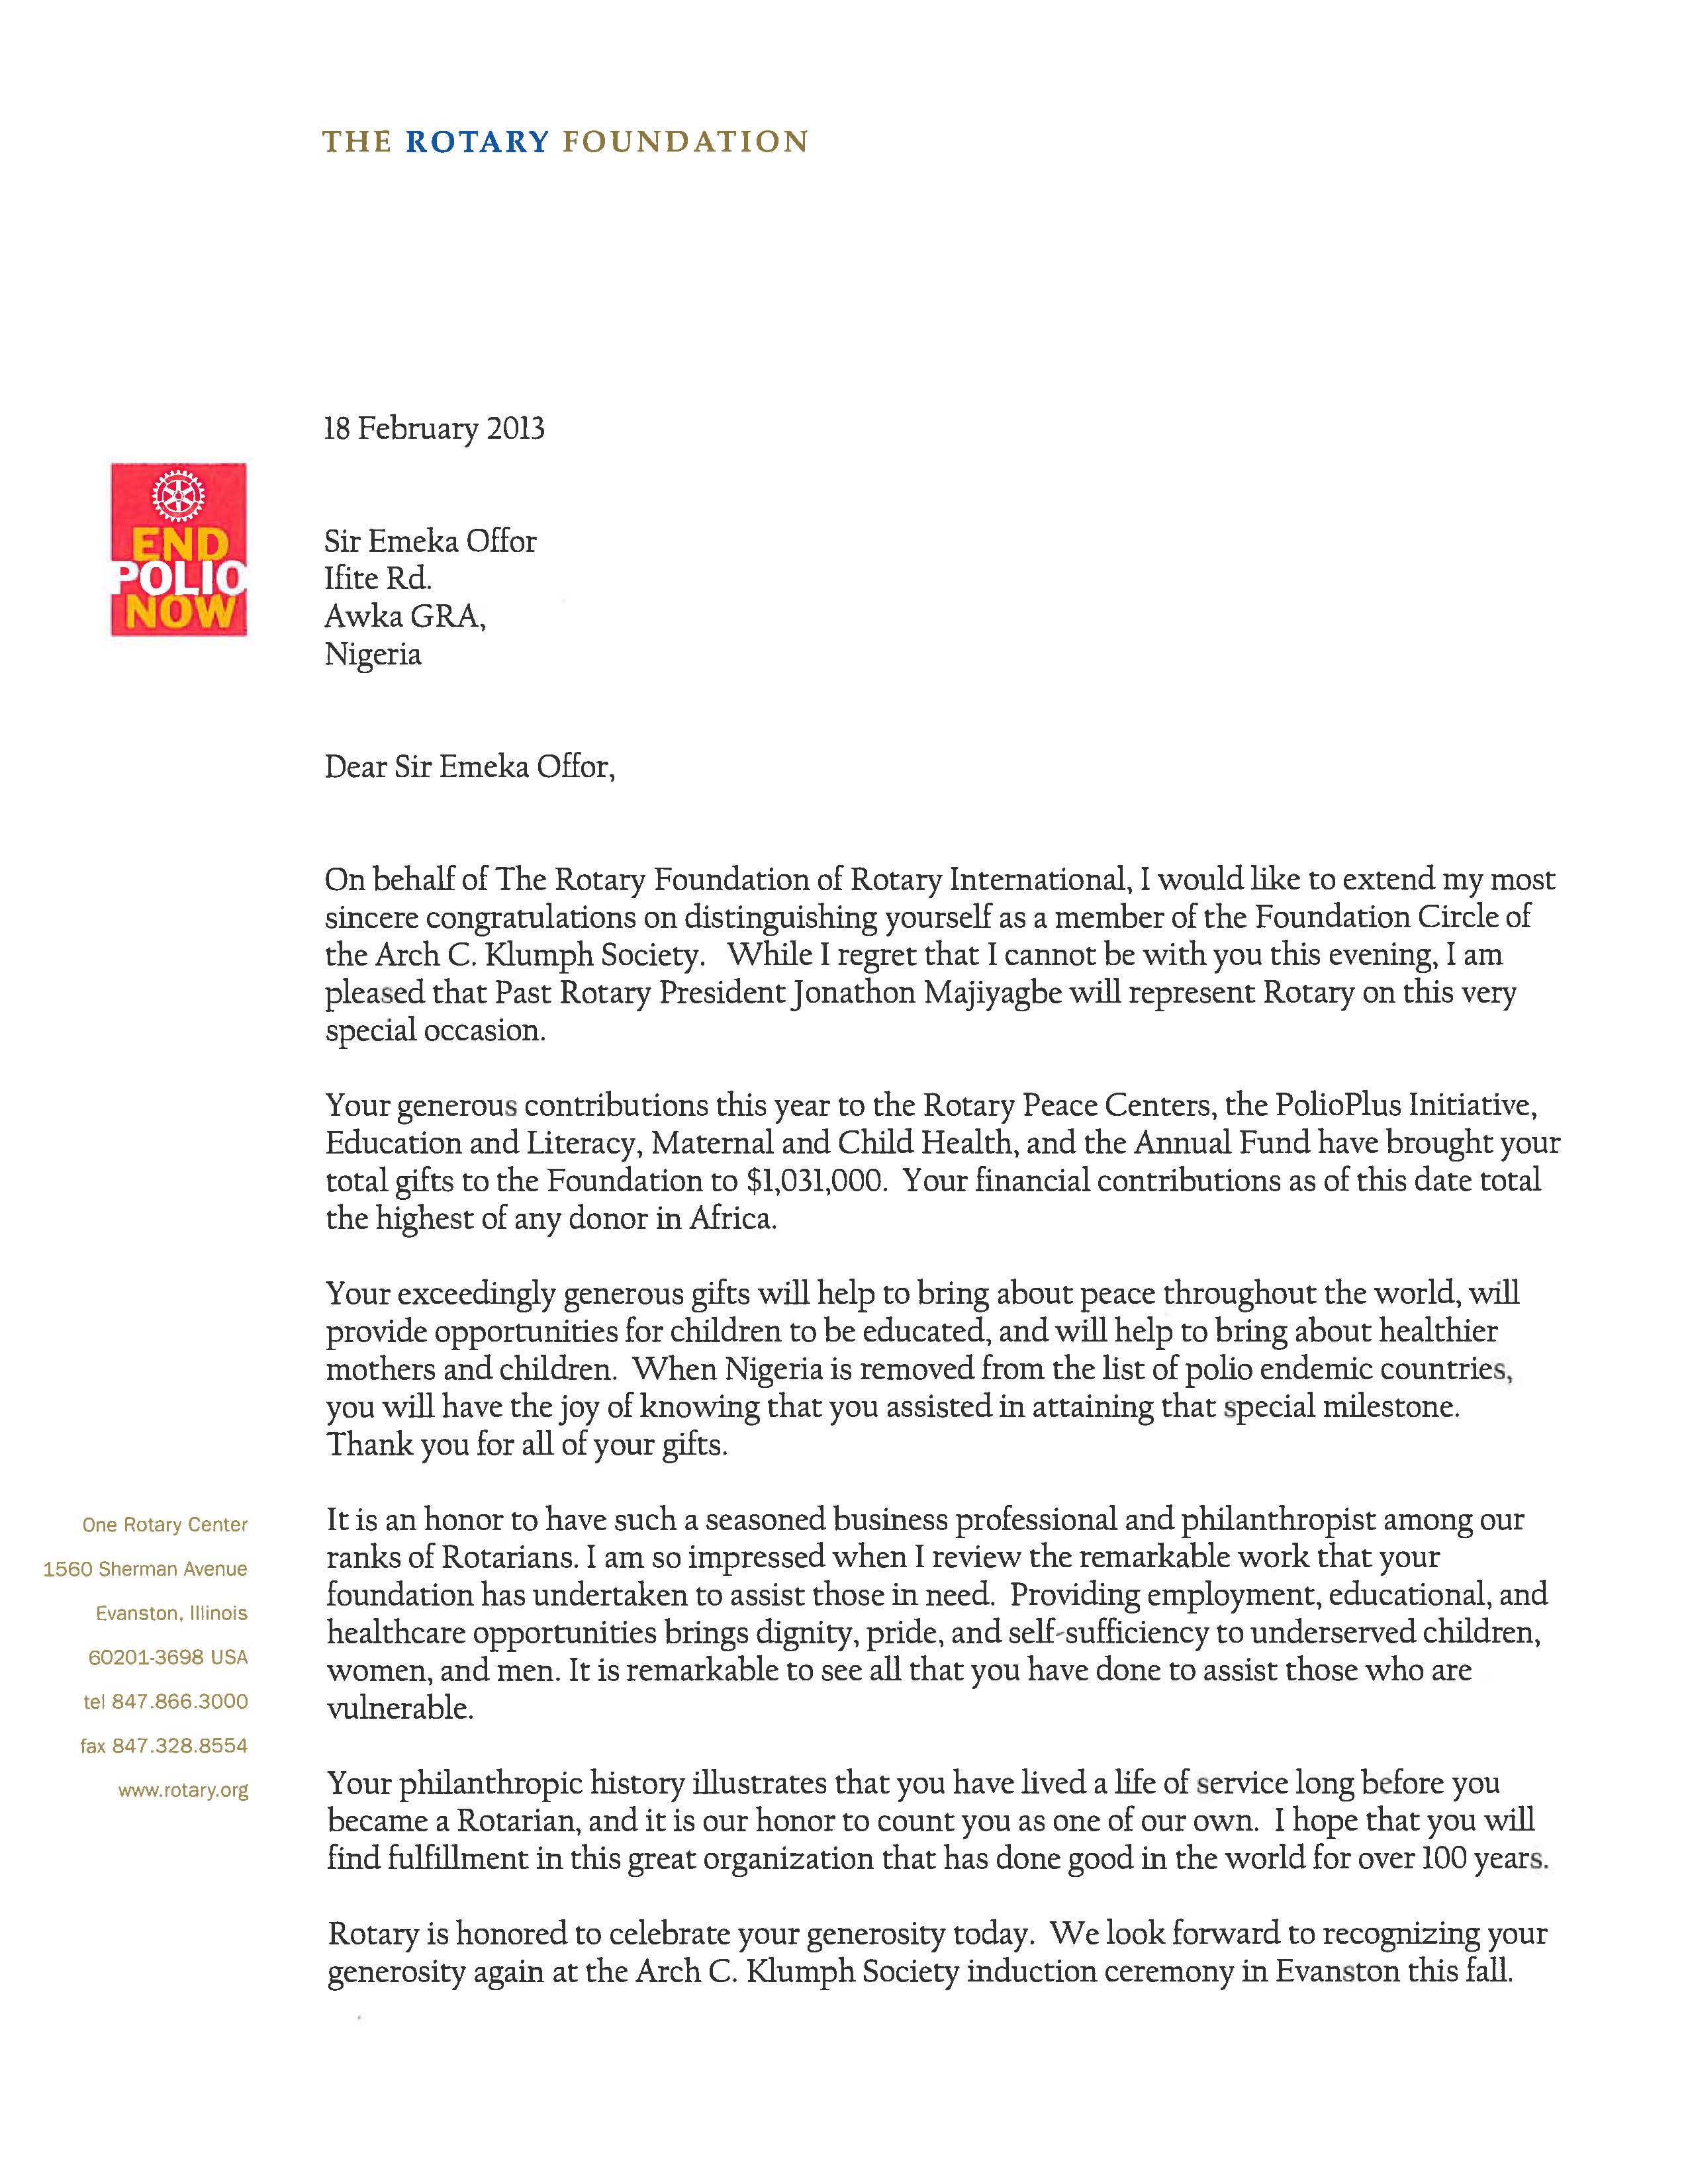 Letter of Thanks from Rotary Chairman